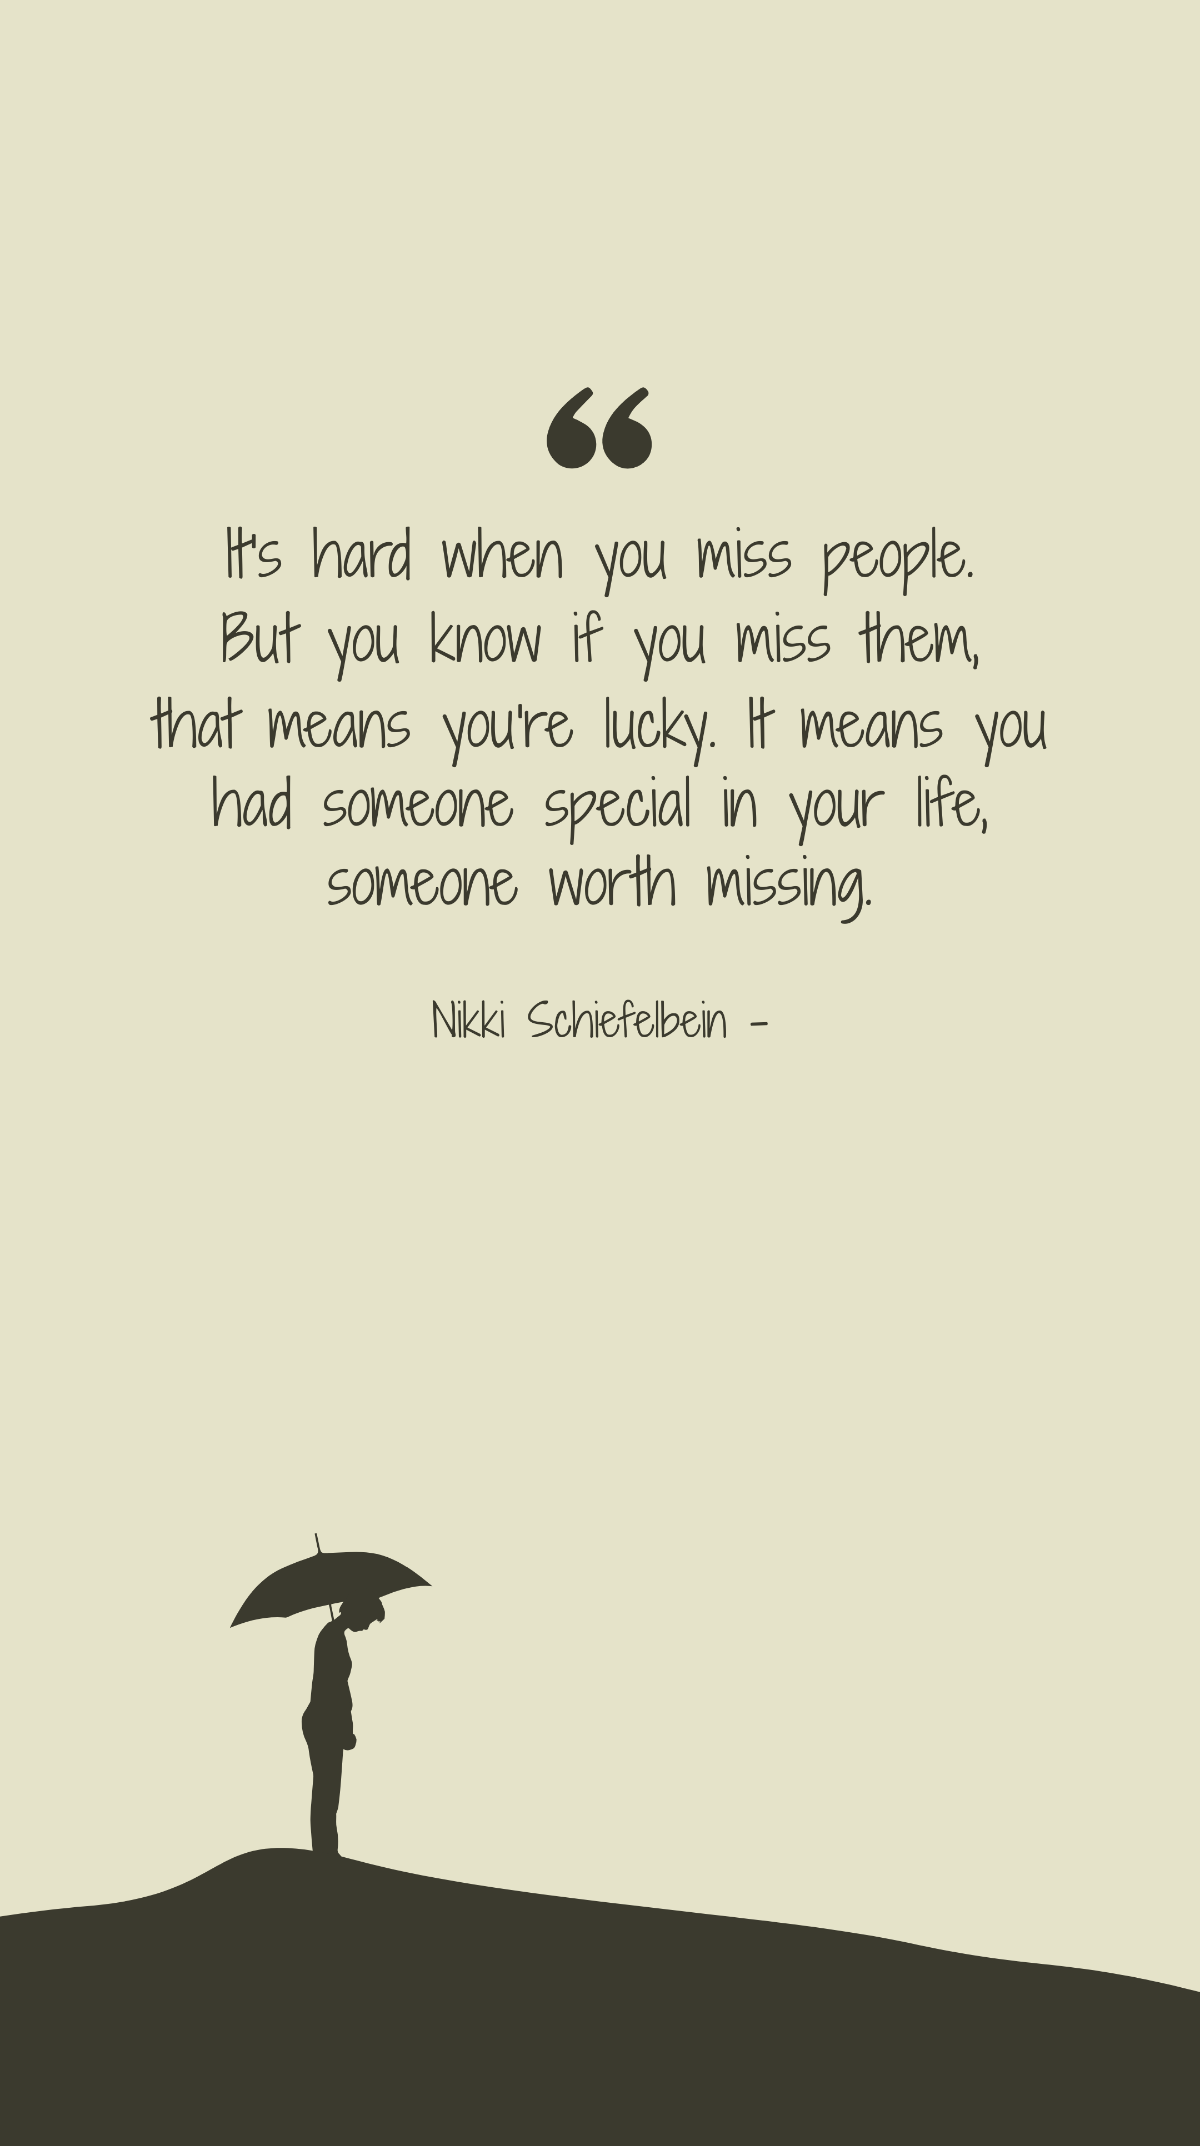 Nikki Schiefelbein - It's hard when you miss people. But you know if you miss them, that means you're lucky. It means you had someone special in your life, someone worth missing. Template